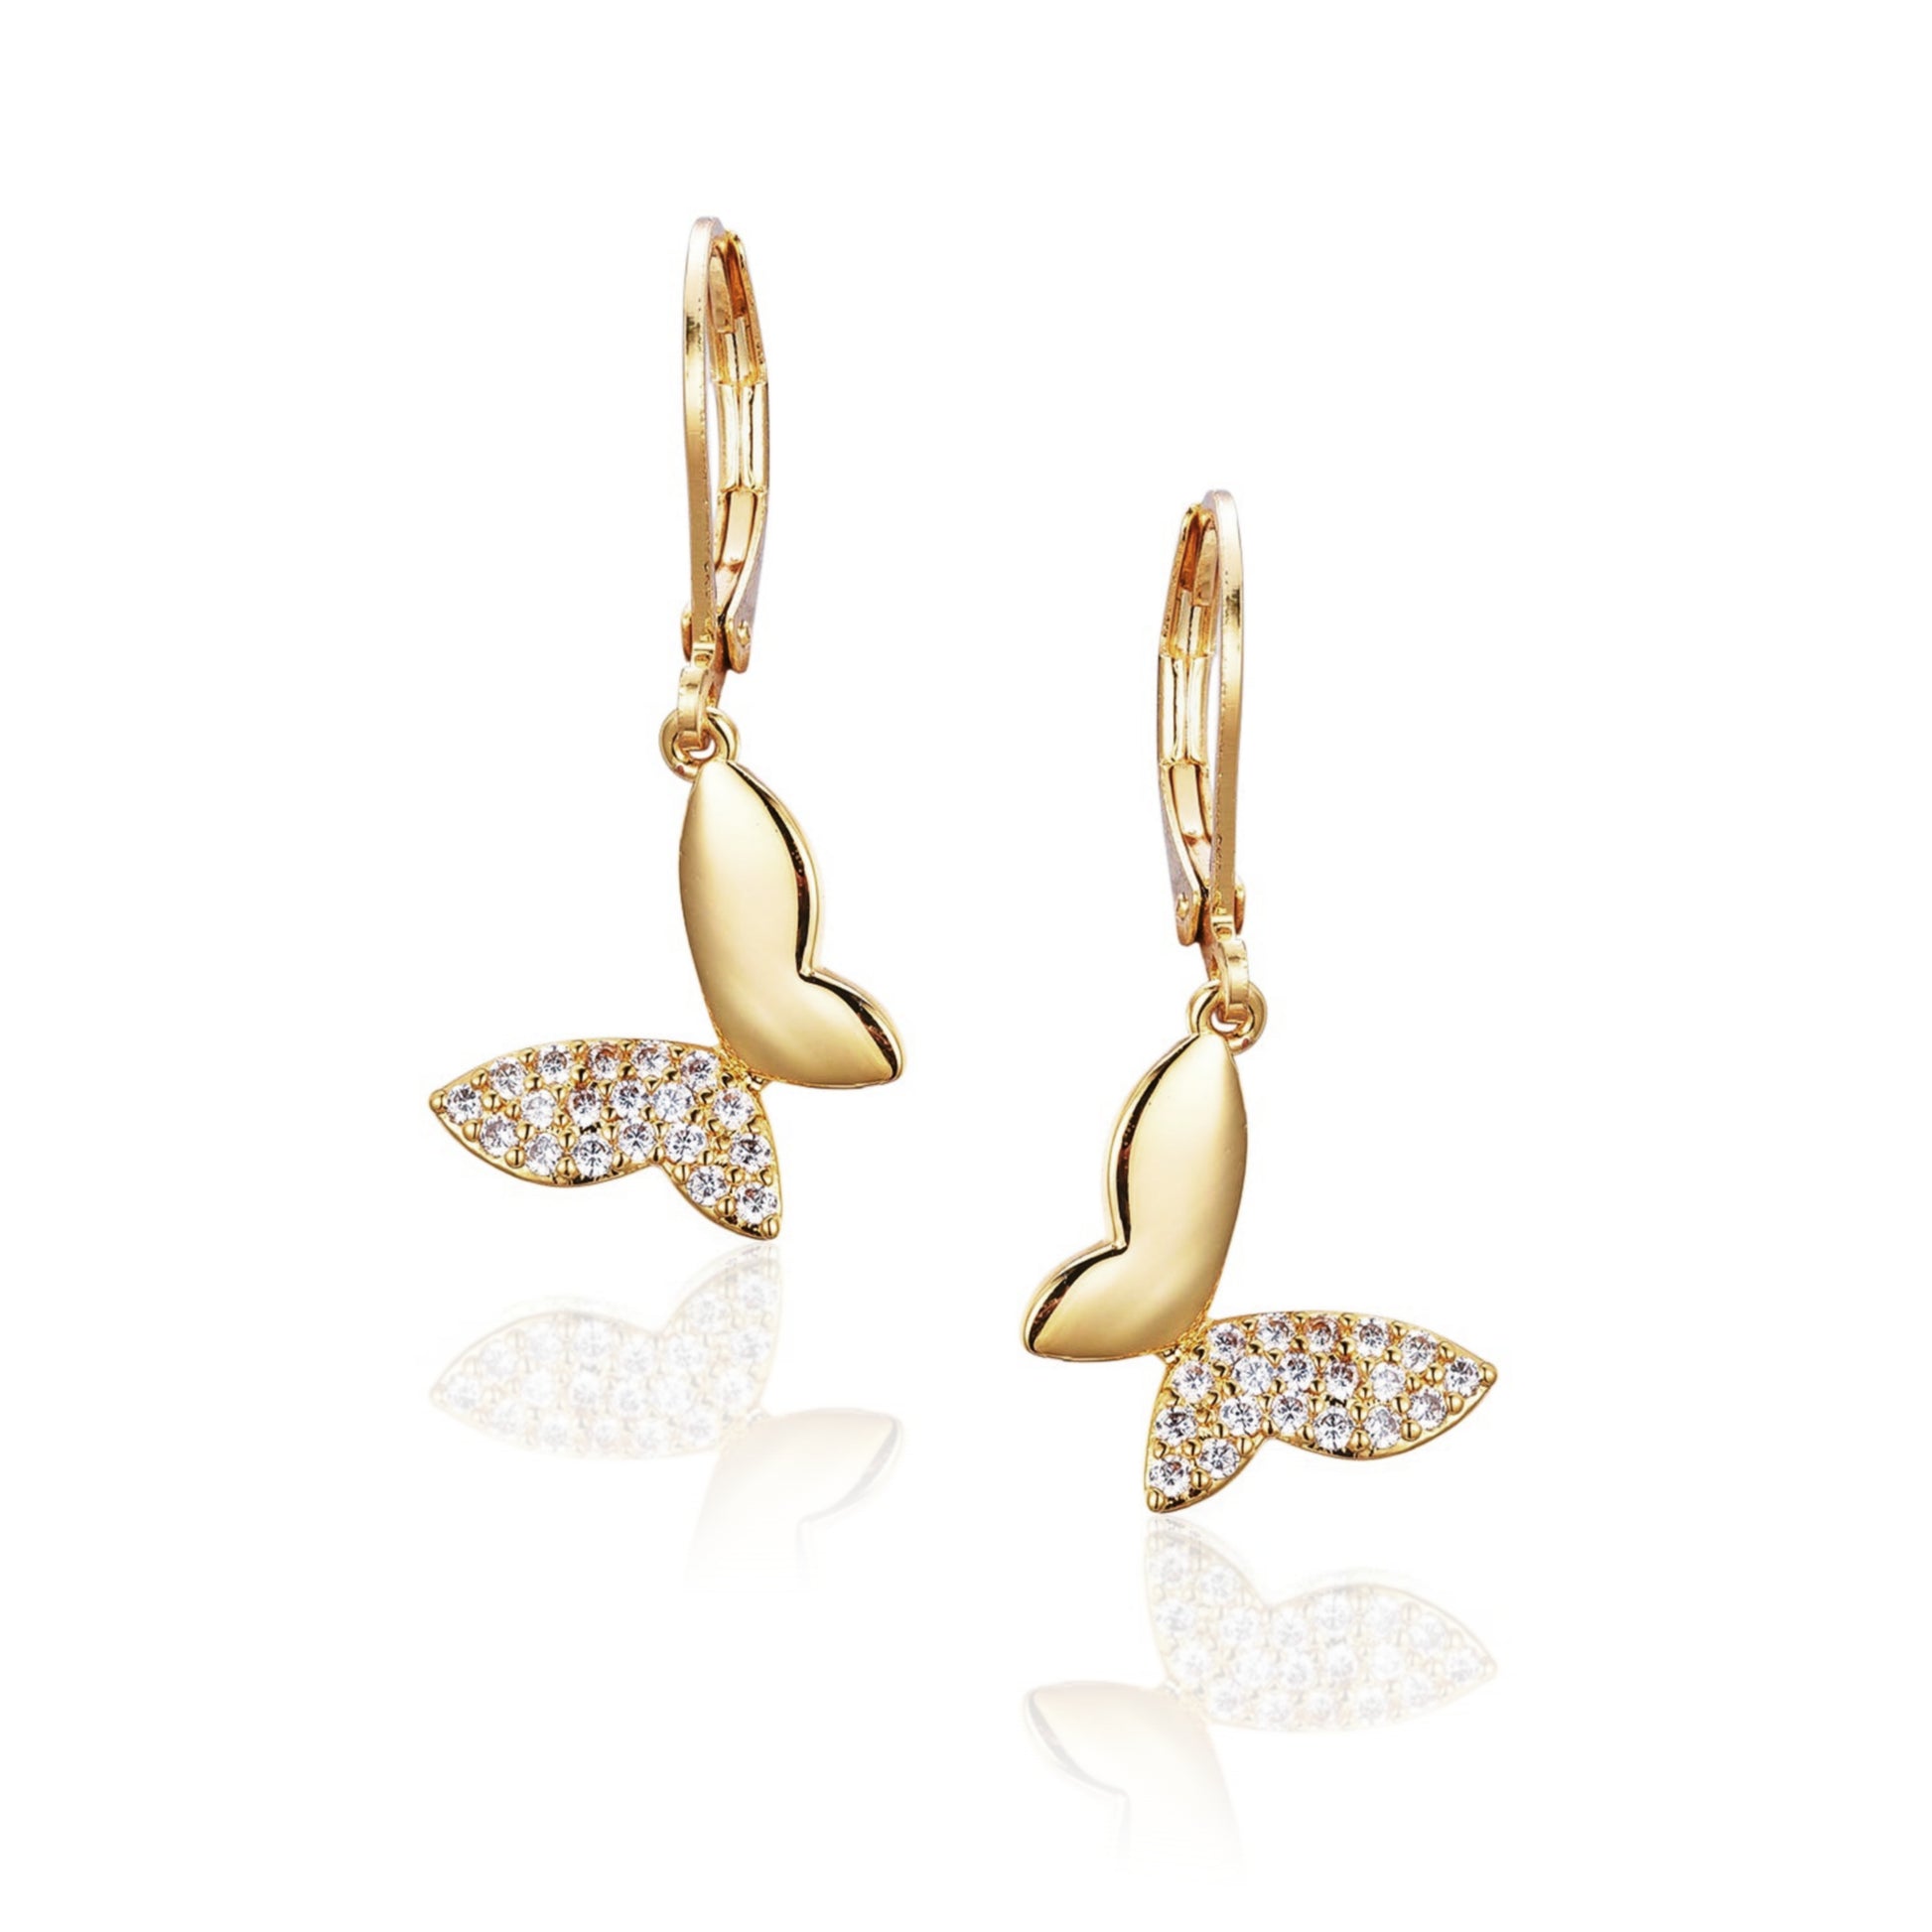 Gold Plated Surgical Steel Angled Half Micropave Leverback Earrings - HK Jewels